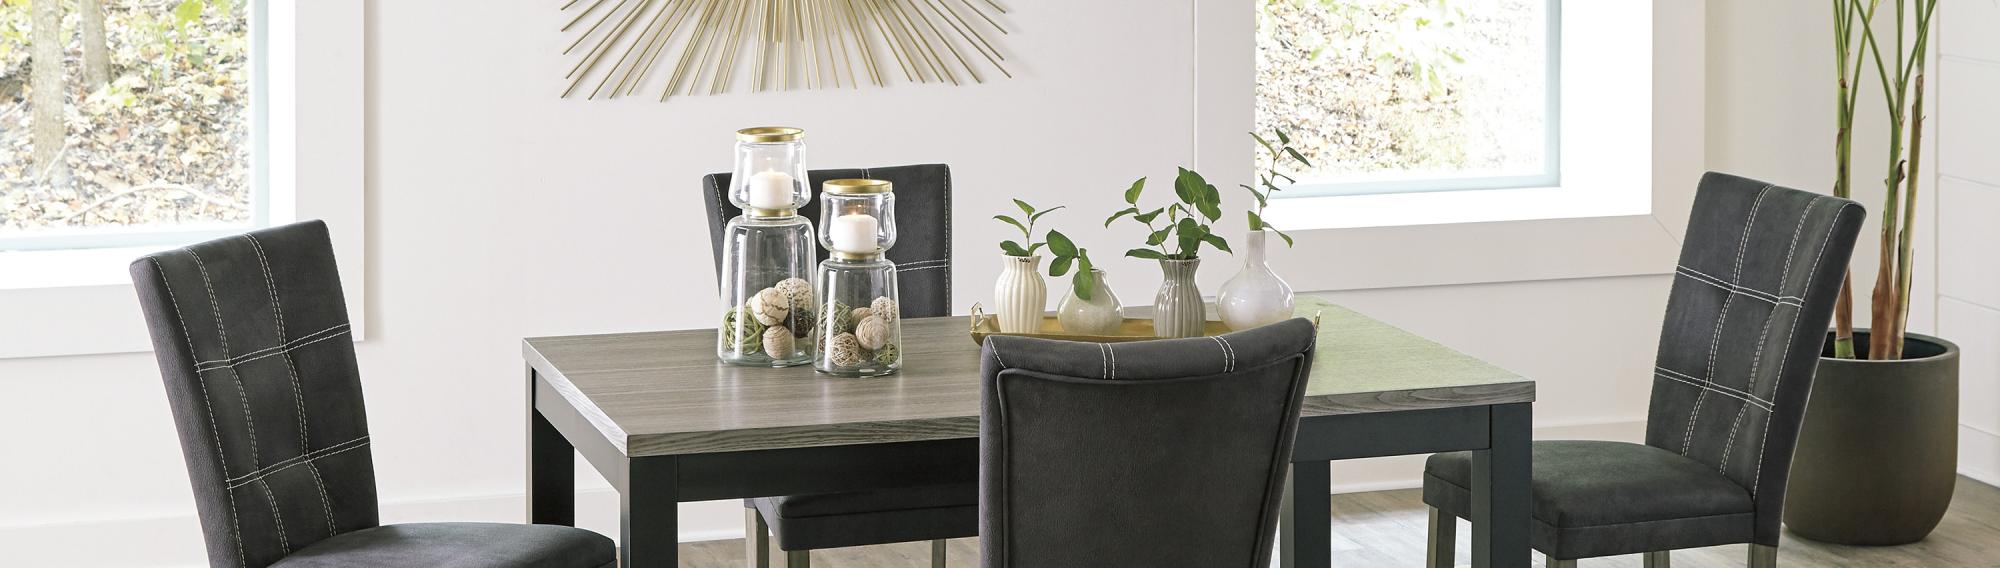 Header image of affordable dining room furniture from Superior Rent to Own